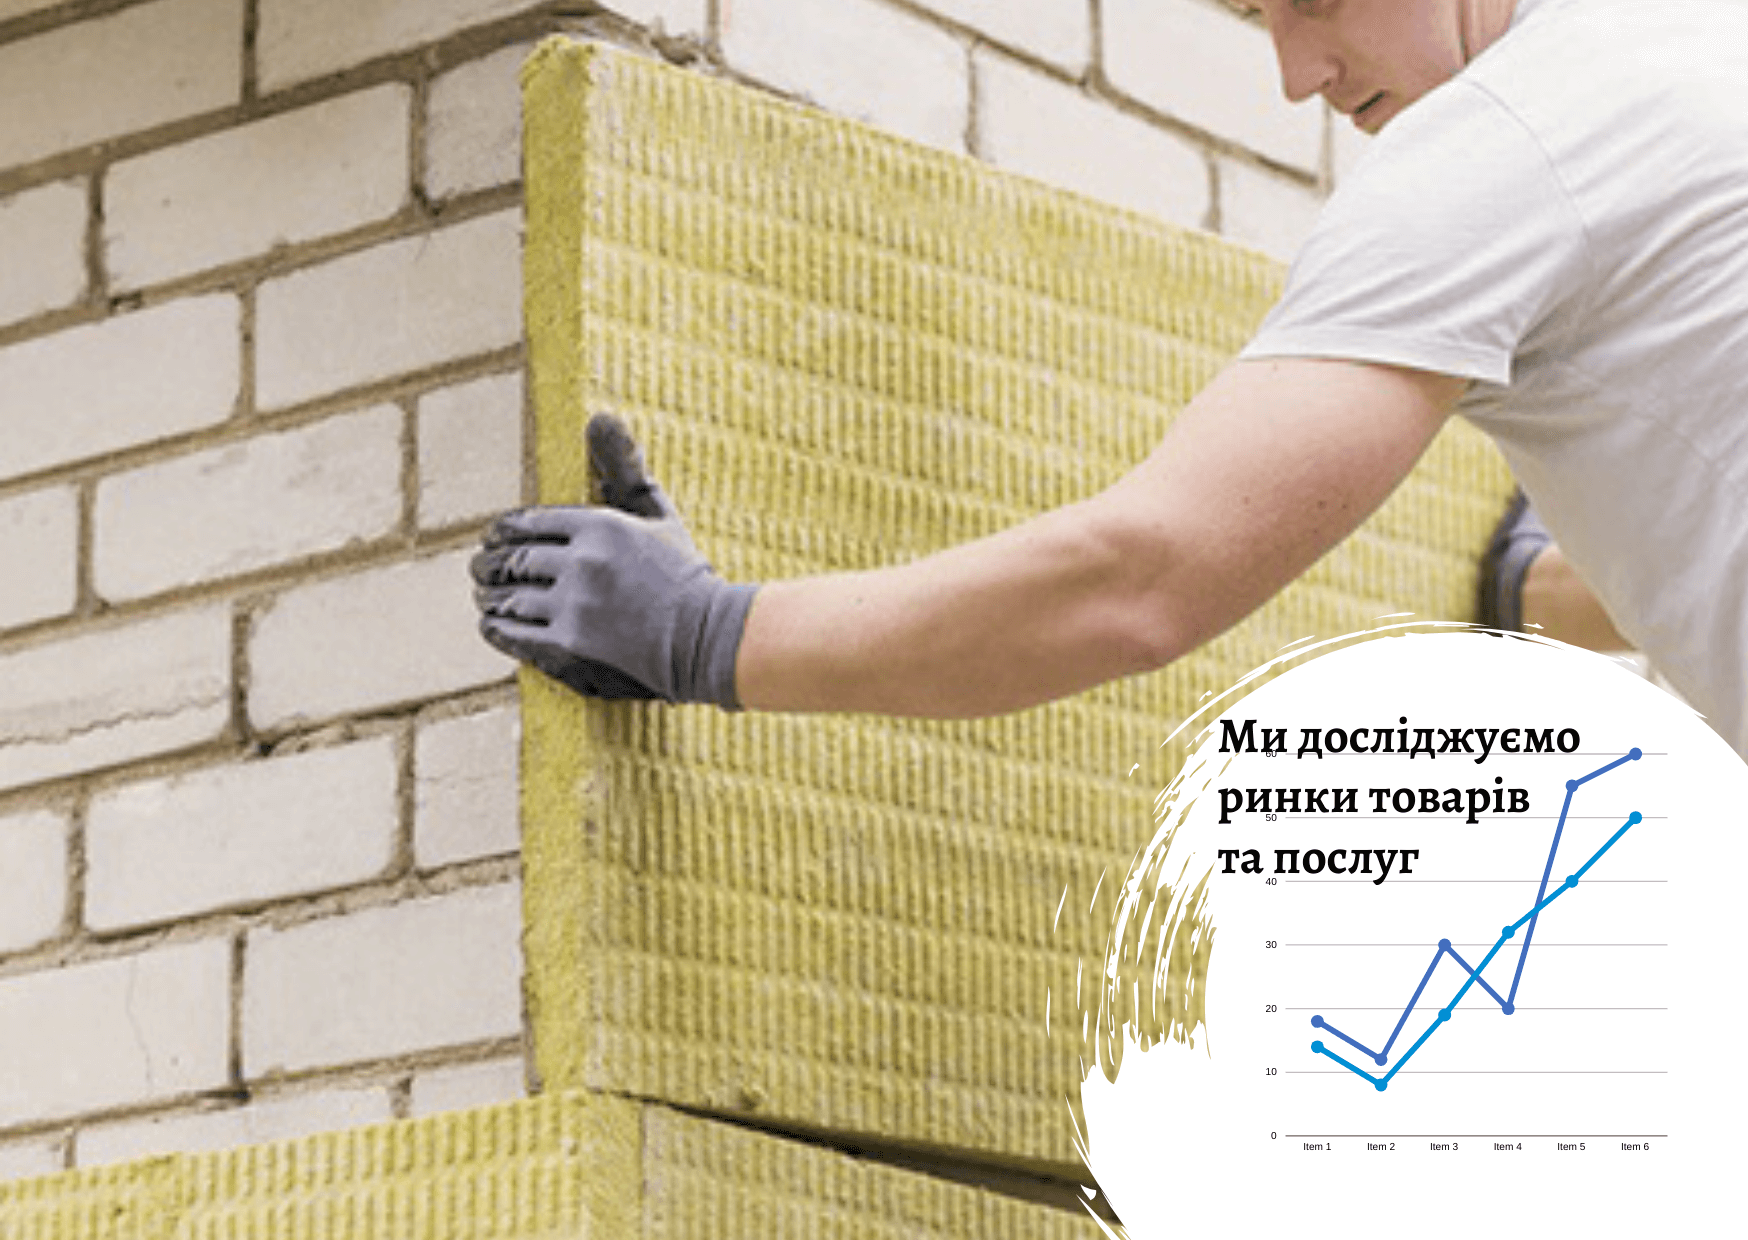 Ukrainian thermal insulation materials market: more than 200 housing construction projects create demand